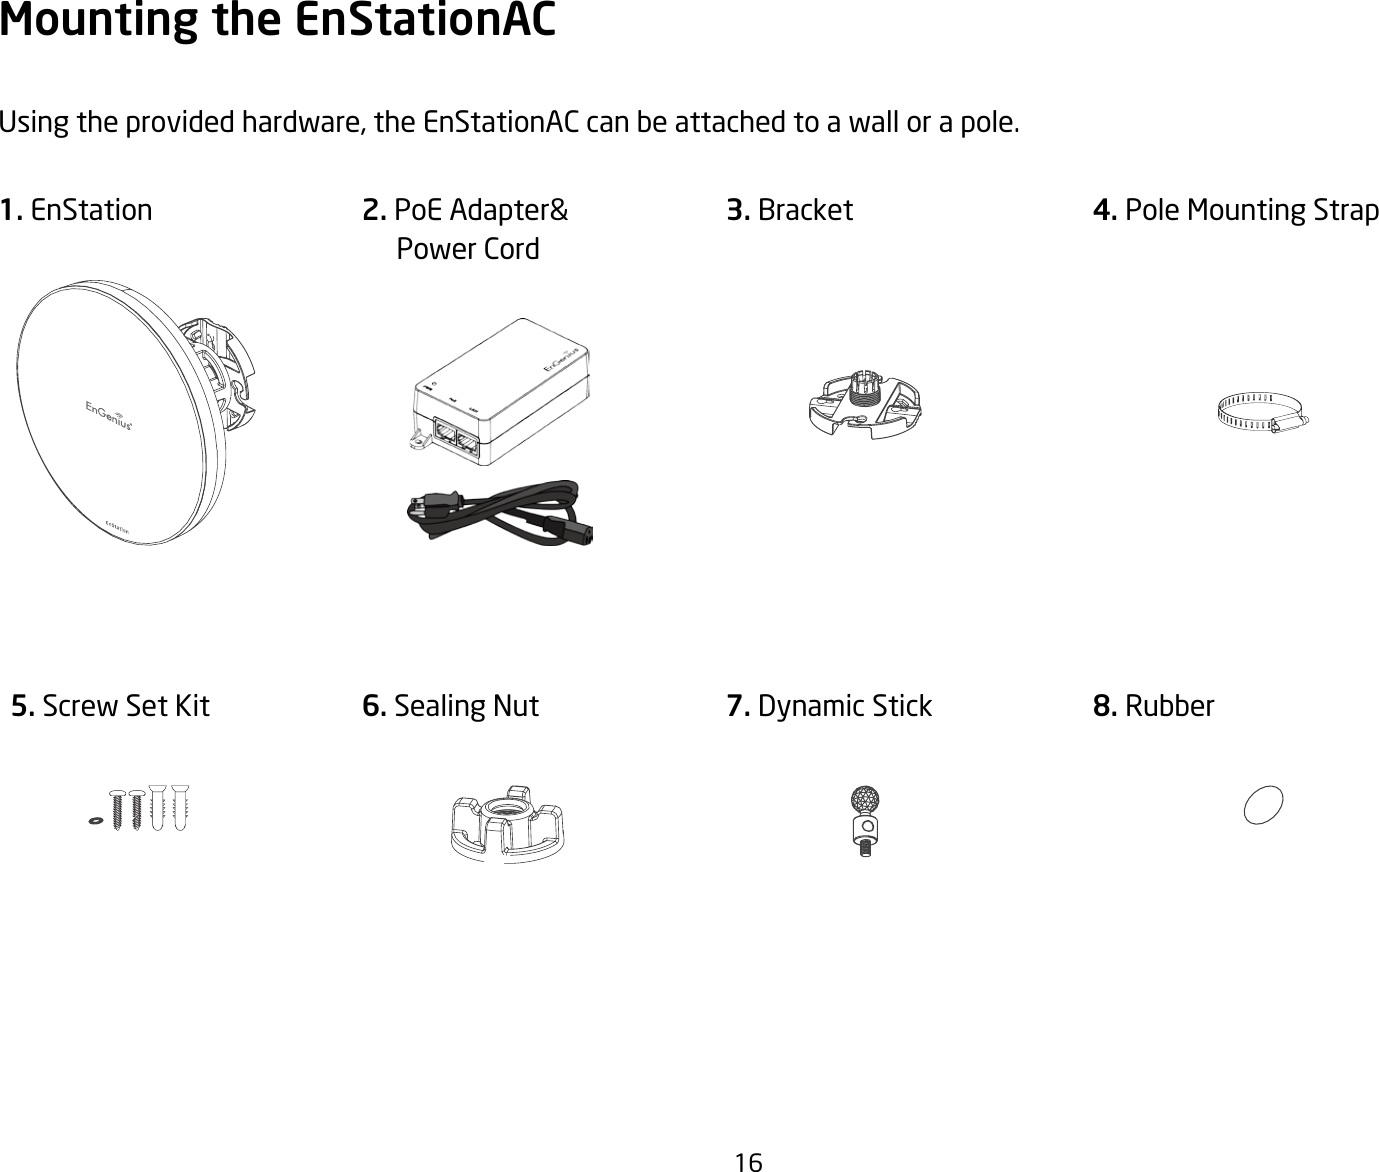 16Mounting the EnStationACUsingtheprovidedhardware,theEnStationACcanbeattachedtoawallorapole.1. EnStation 3. Bracket 5. Screw Set Kit 6. Sealing Nut4. Pole Mounting Strap 7. Dynamic Stick 8. Rubber2. PoE Adapter&amp;     Power Cord